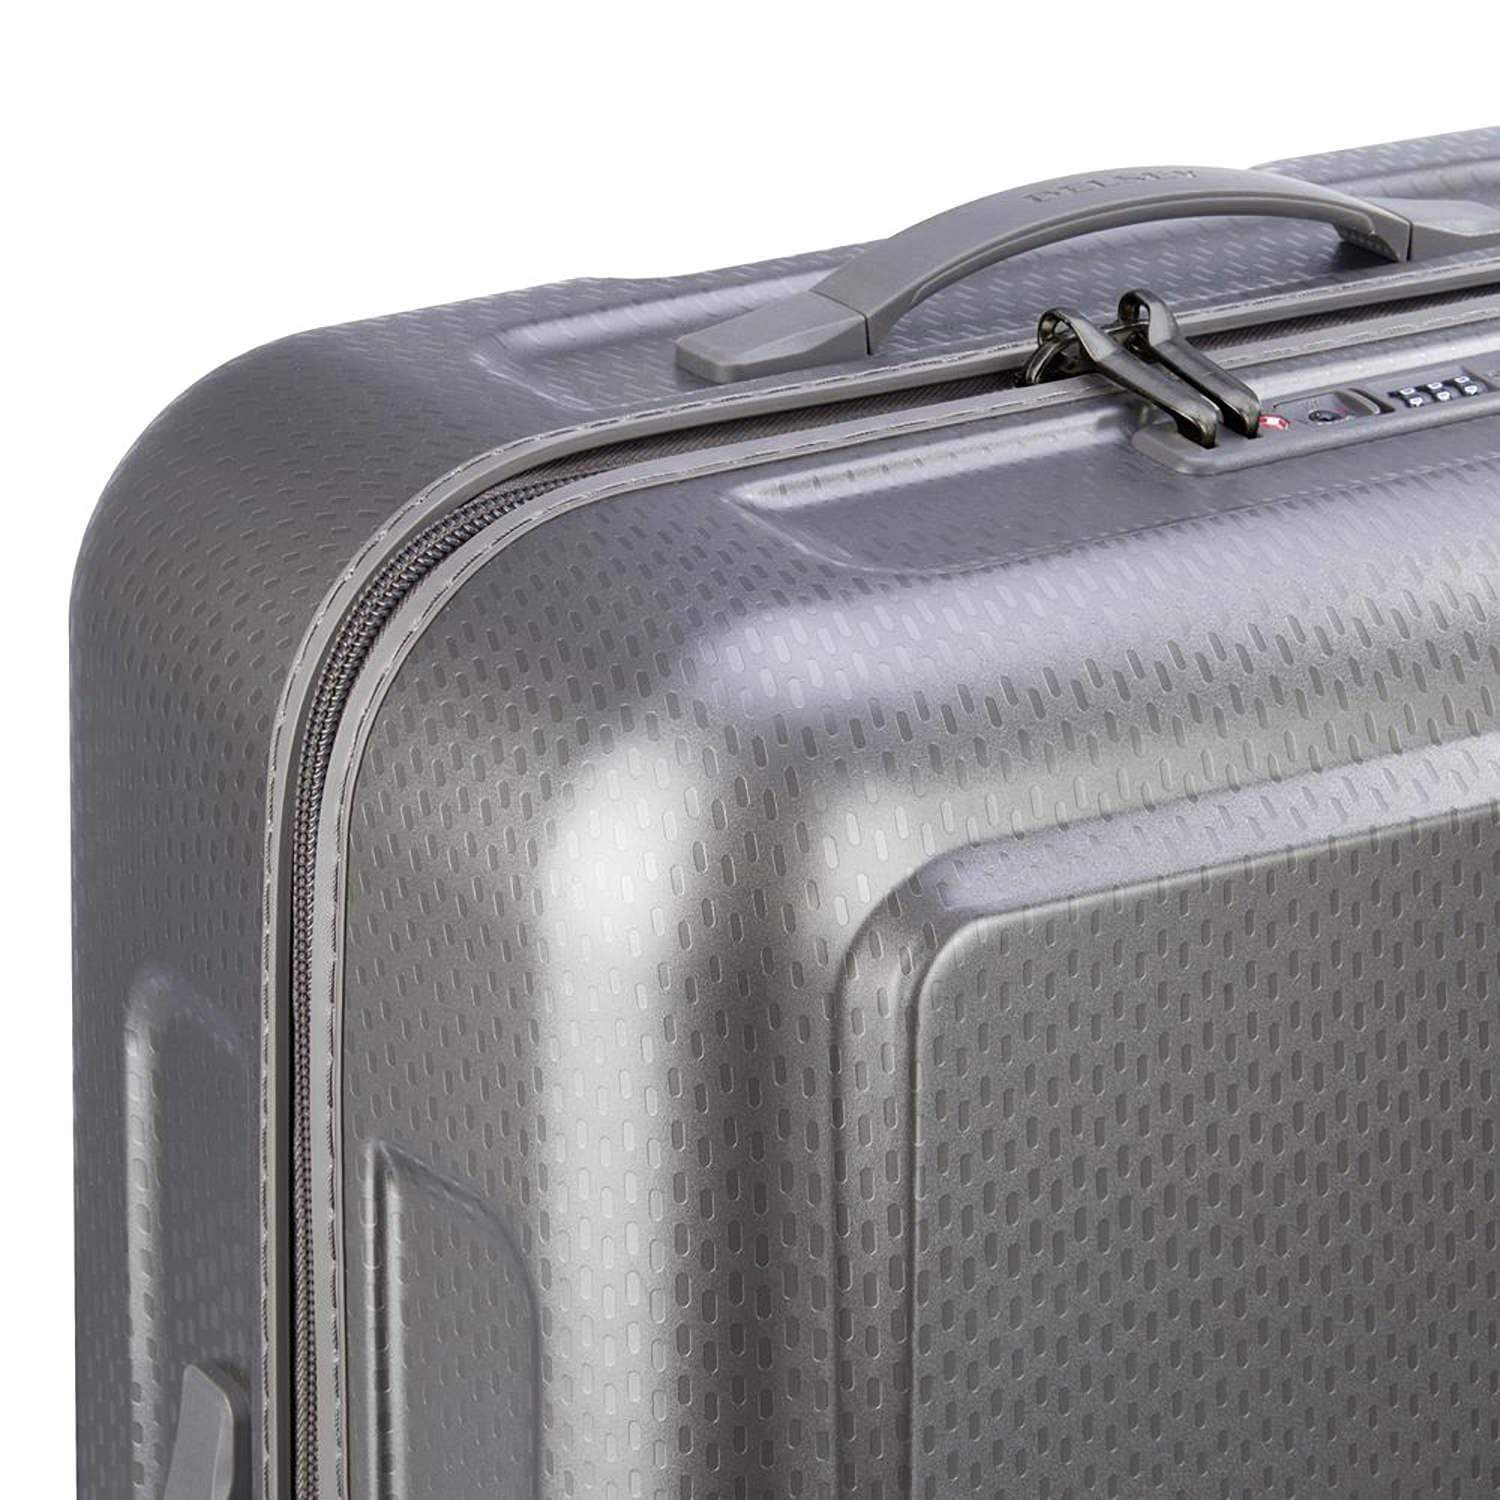 Delsey Turenne 70 4 Double Wheel Trolley Case - Silver - 00162182011 SILVER - Jashanmal Home